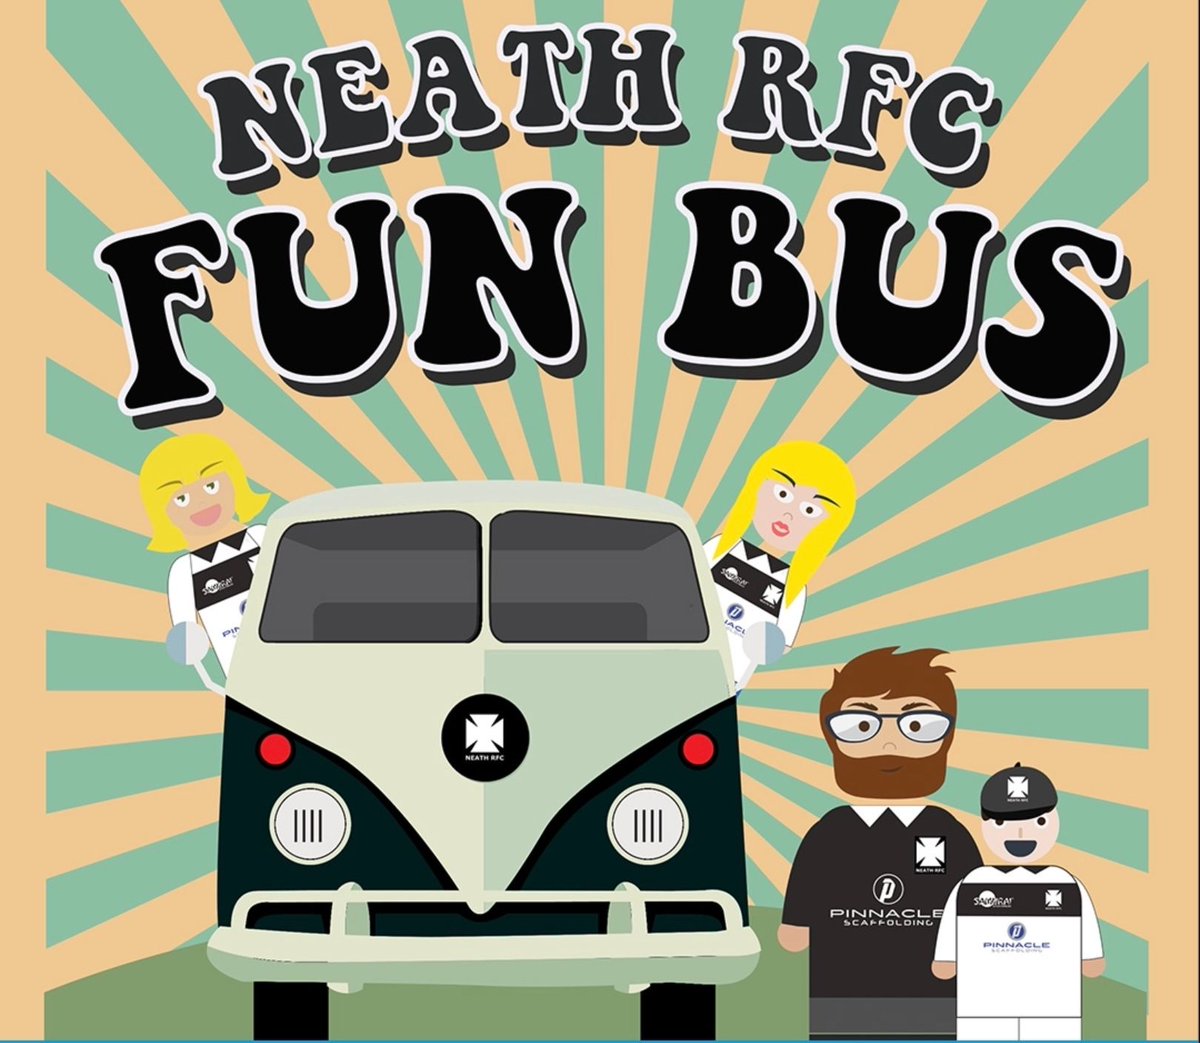 NEATH RFC FUN BUS (EBBW VALE v NEATH – SAT’ 27th January ⚫️🏉 Support the boys and book YOUR seat on the “FUN BUS” Contact Robert on 07890645195 or Gillian on 07807043978 Bus leaves at 12.00 (2.30pm KO) – Book Now to secure your seat ! #NeathRFC